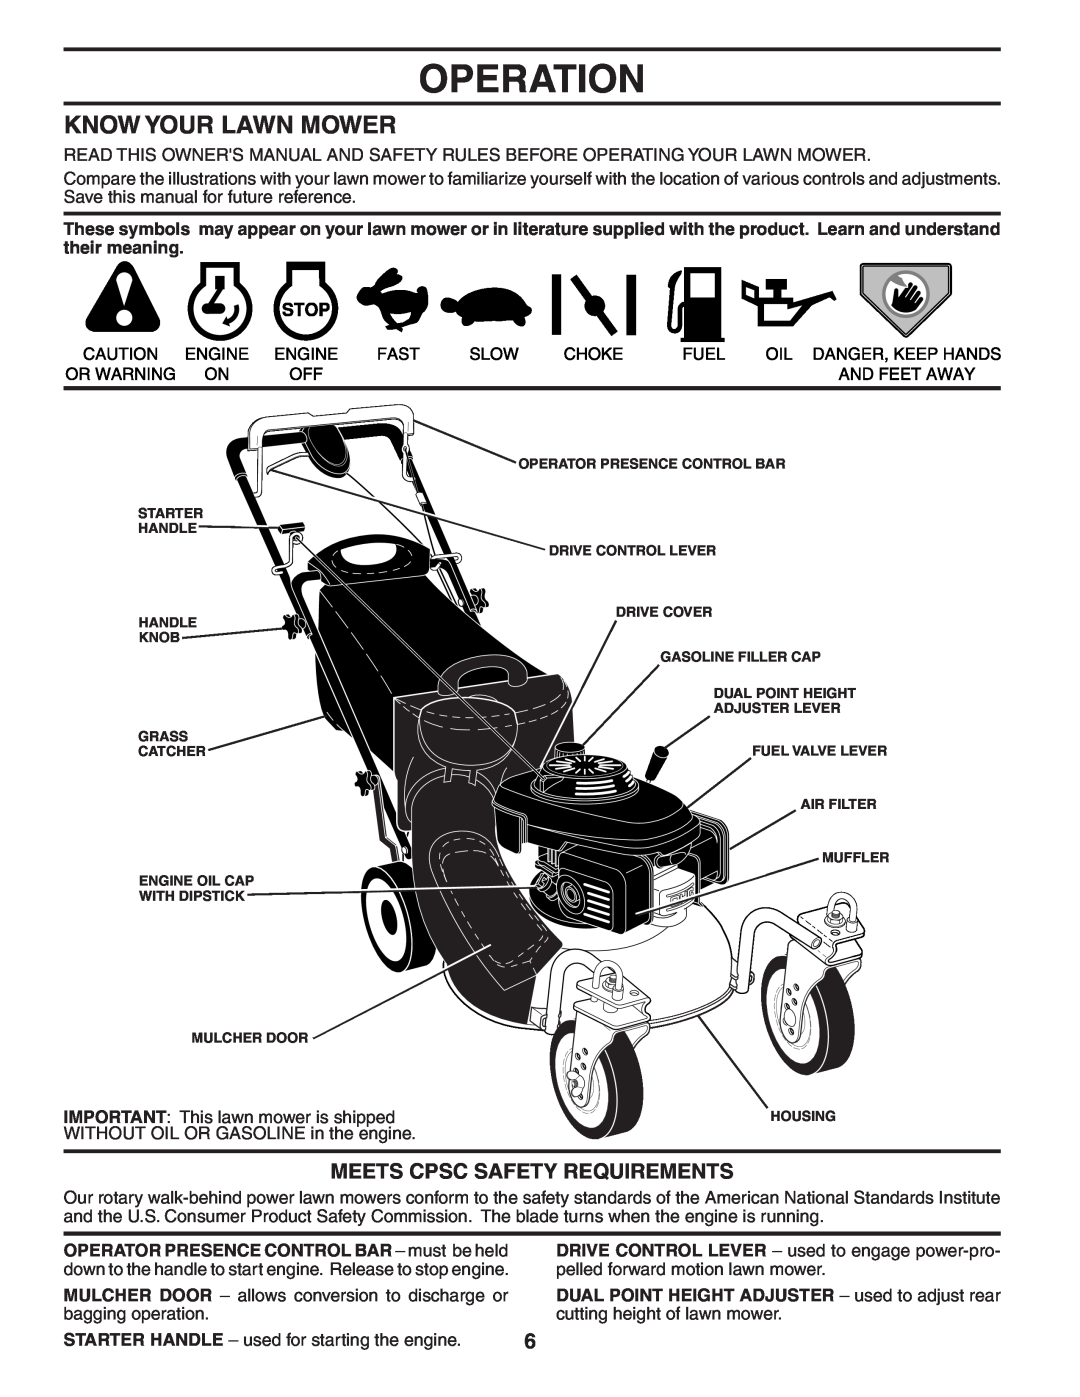 Husqvarna 65RSW21HV owner manual Operation, Know Your Lawn Mower, Meets Cpsc Safety Requirements 